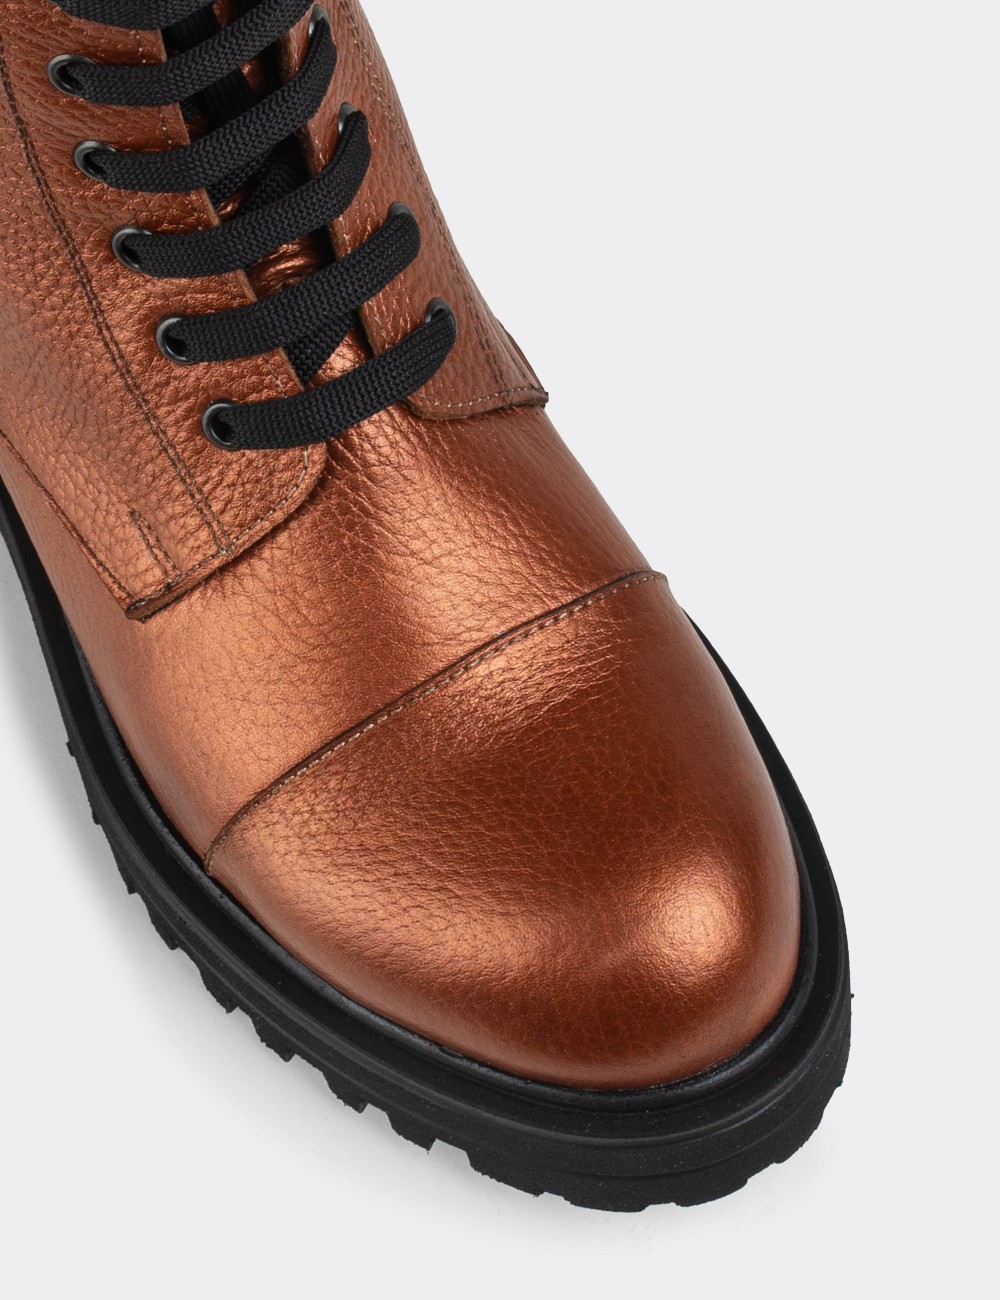 Copper  Leather Boots - 01802ZBKRE01